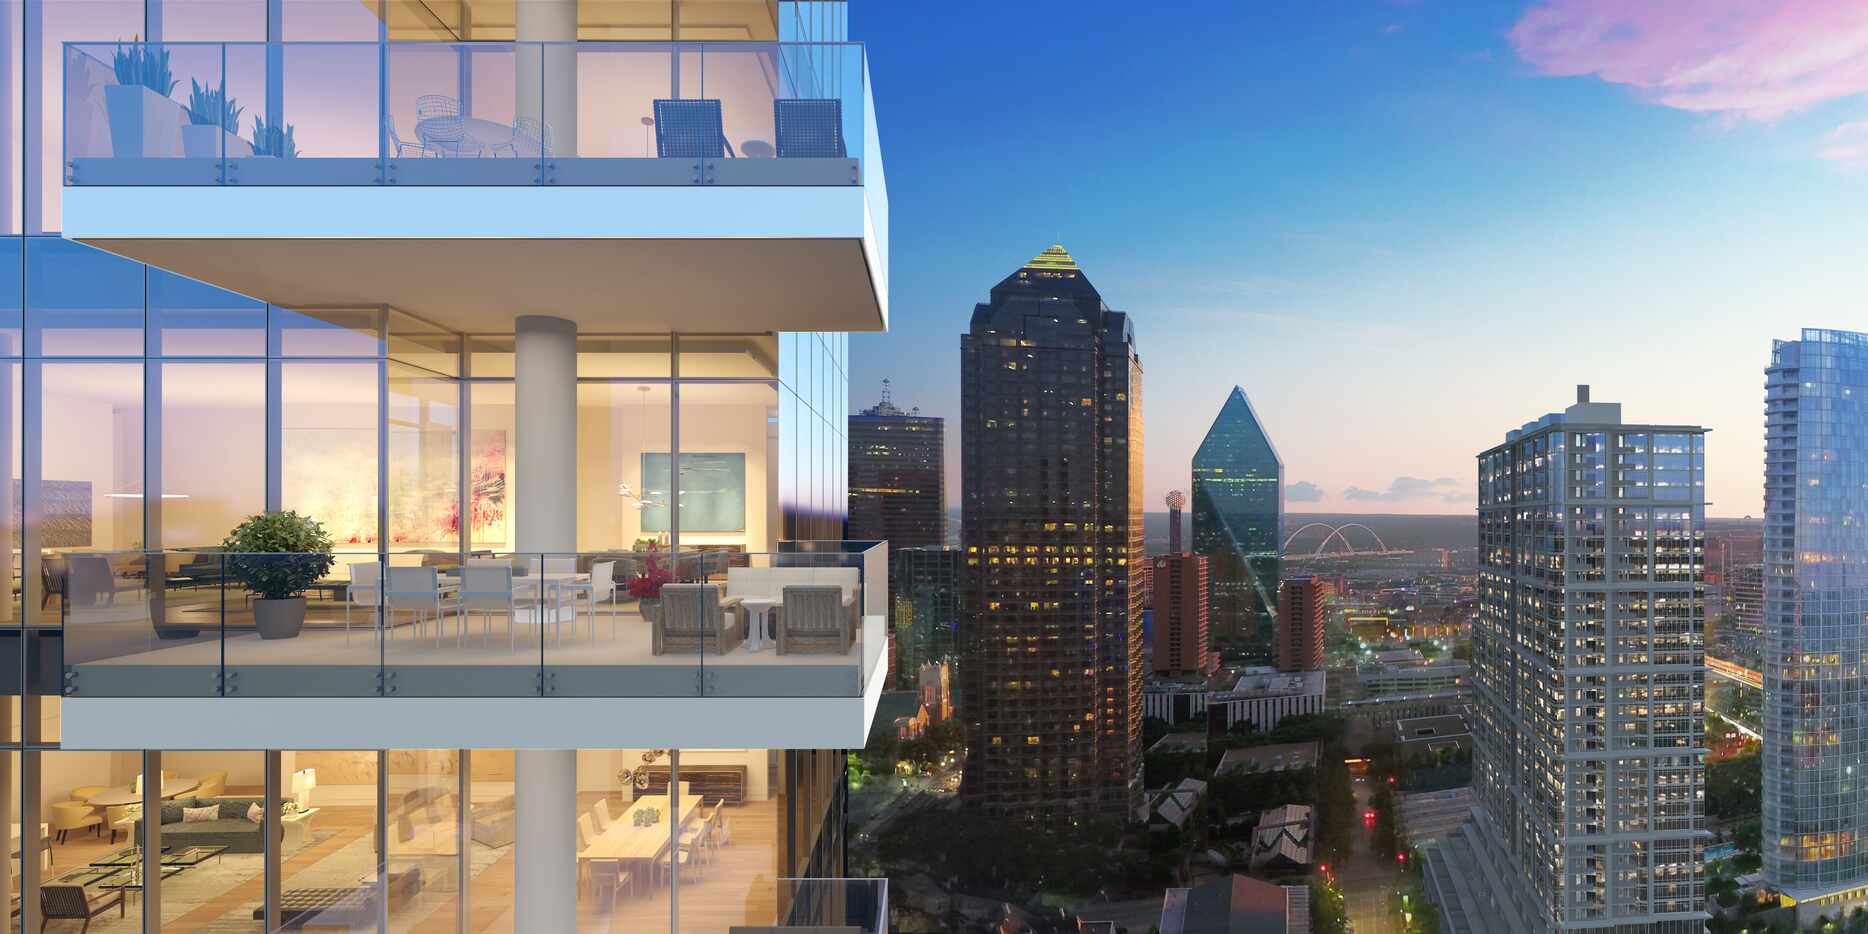 Condos in the Hall Arts Residences tower will start at around $2 million.